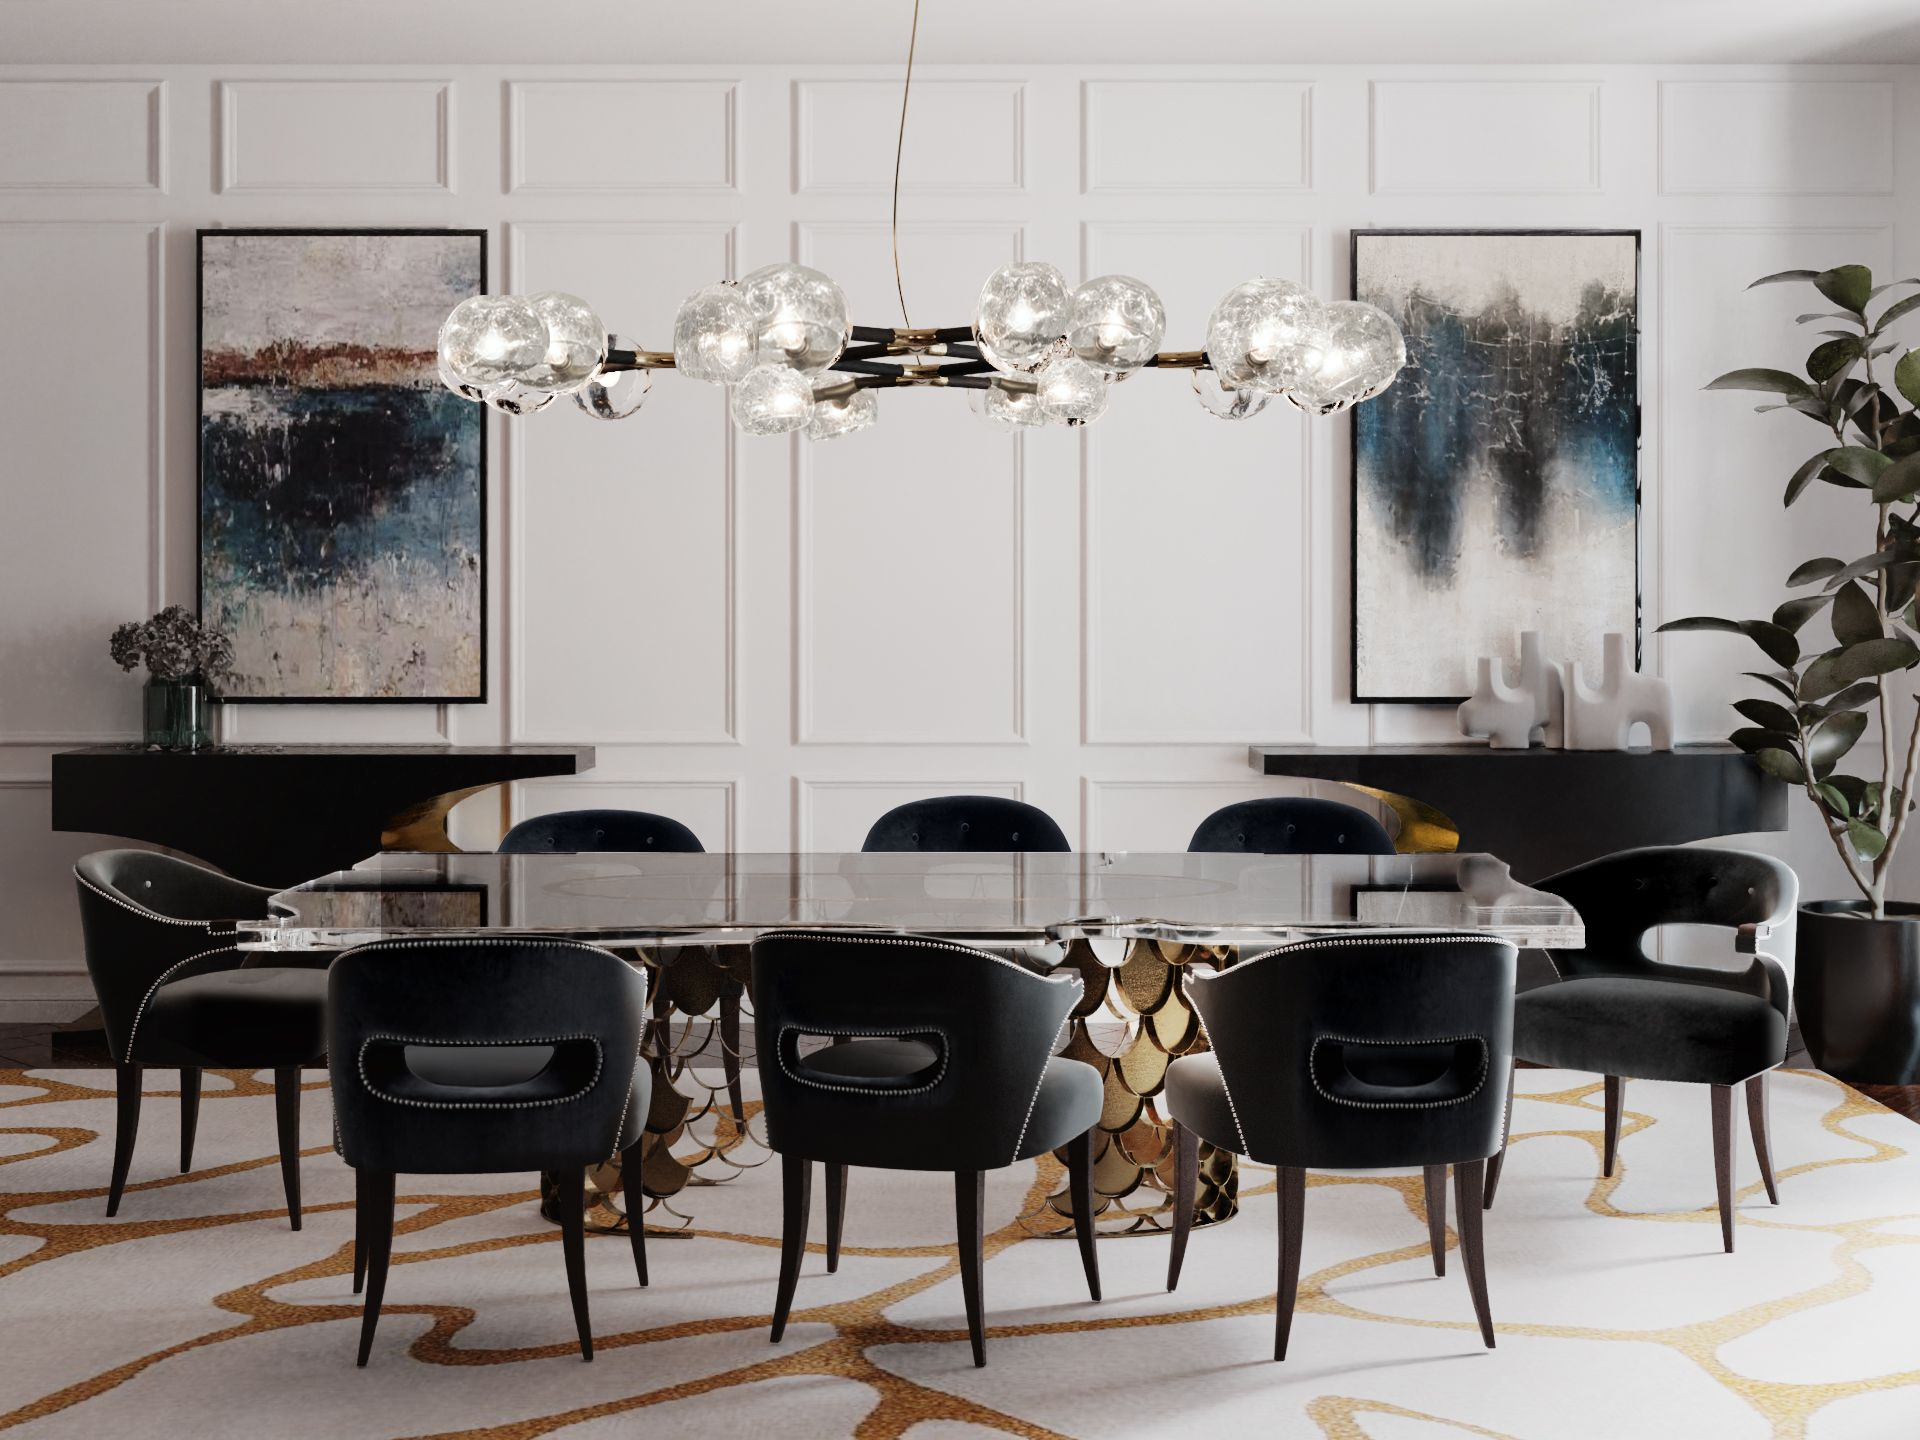 Dining Room Decor That Will Bring Refined Elegance To Any Design - Home'Society